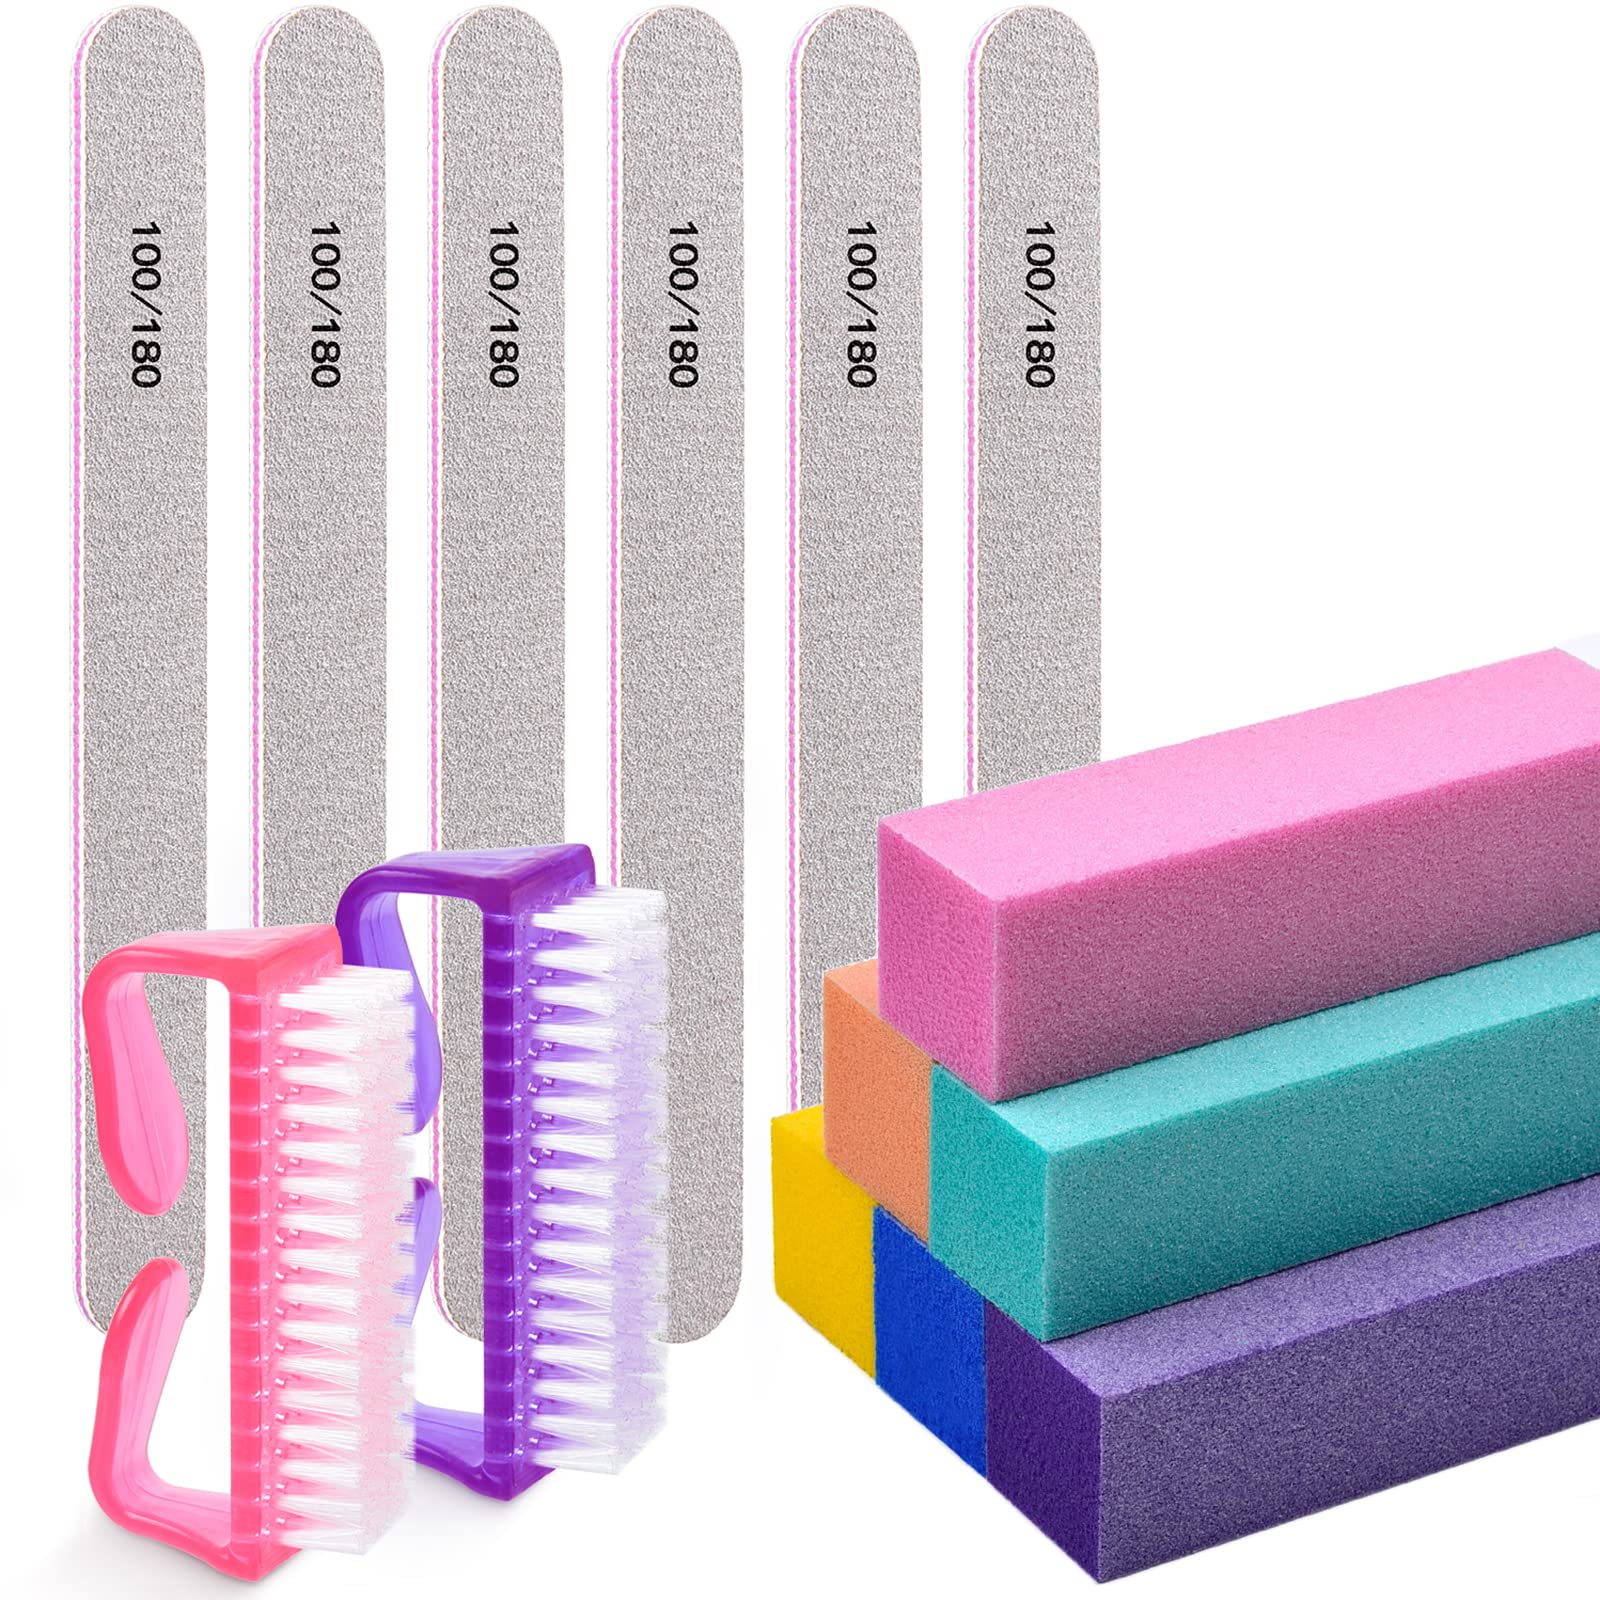 Nail Files and Buffers, MORGLES Professional Buffers Block 100/180 Grit, Double Sided Emery Board Manicure Tools Nail Scrubbing Brush 14pcs